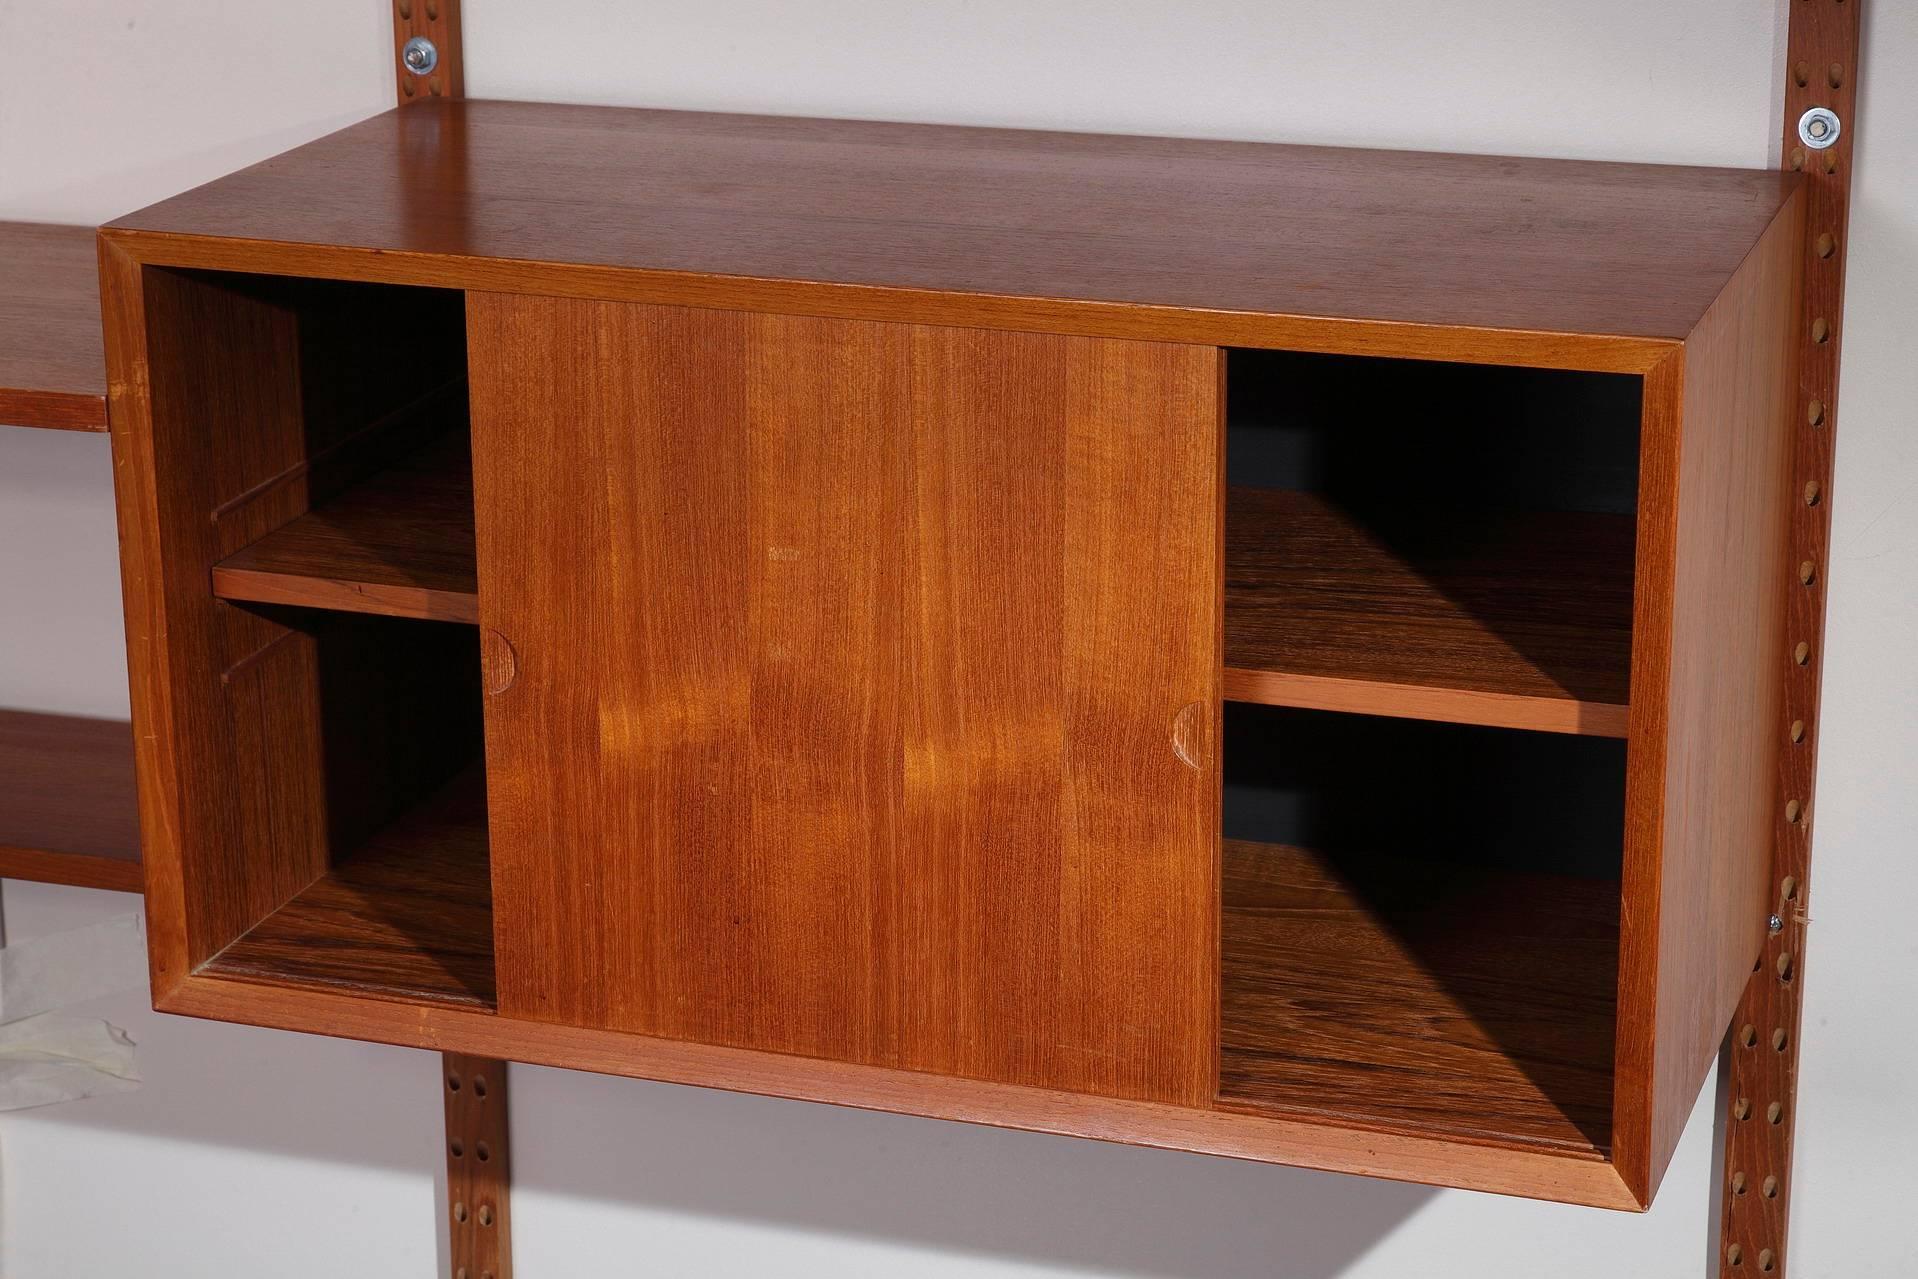 Poul Cadovius Royal System wall unit system in teak from the 1950s. It is composed of four vertical ladders with six shelves and three containers as follow: one container with lateral doors, one container with a flap and storage for magazines, and